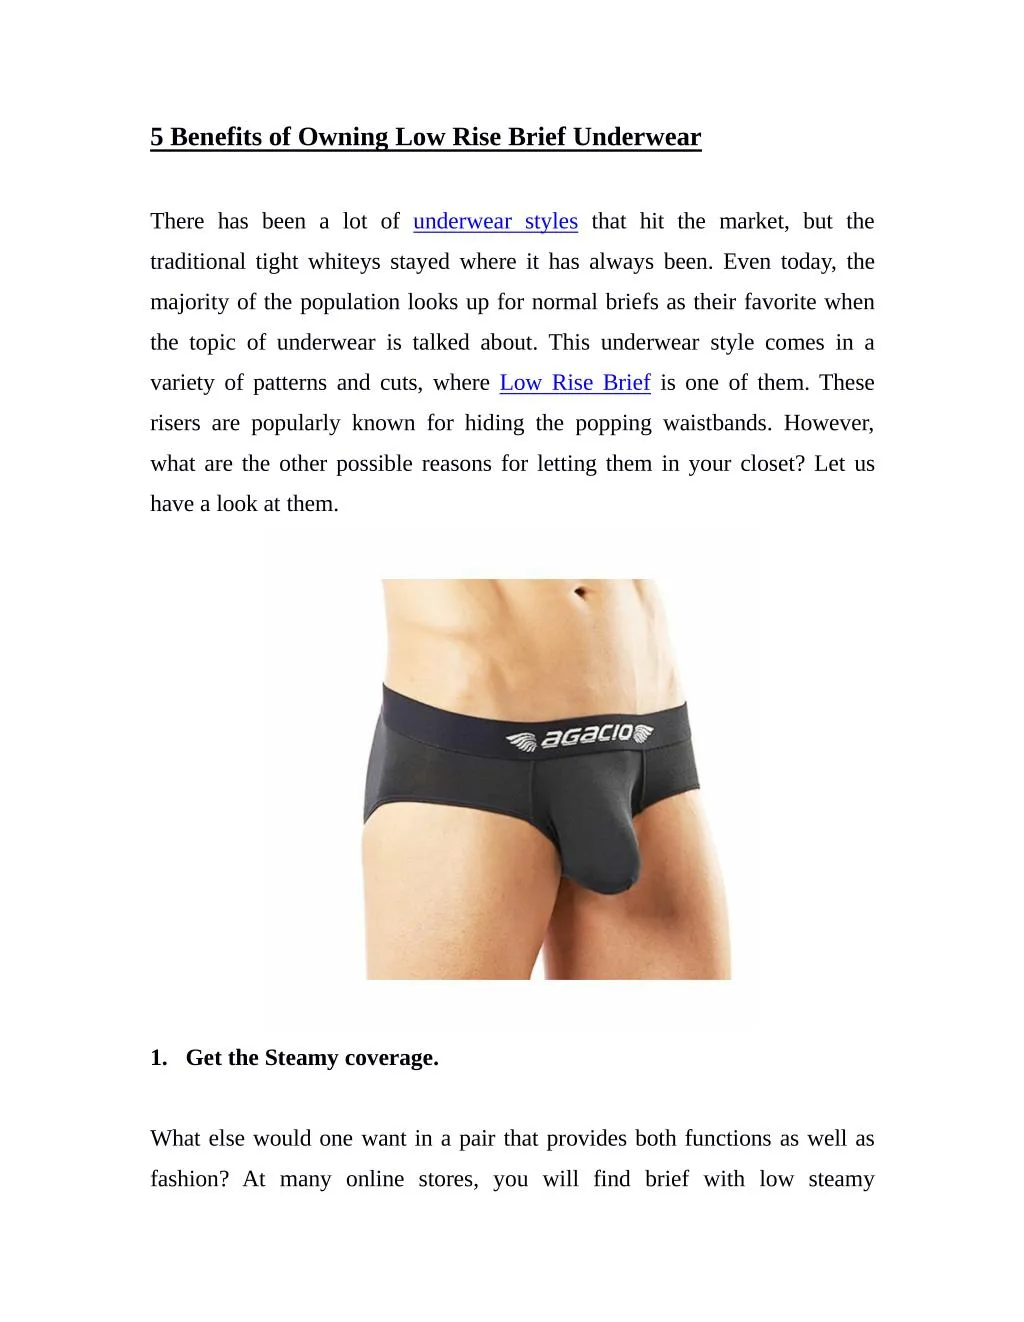 5 benefits of owning low rise brief underwear